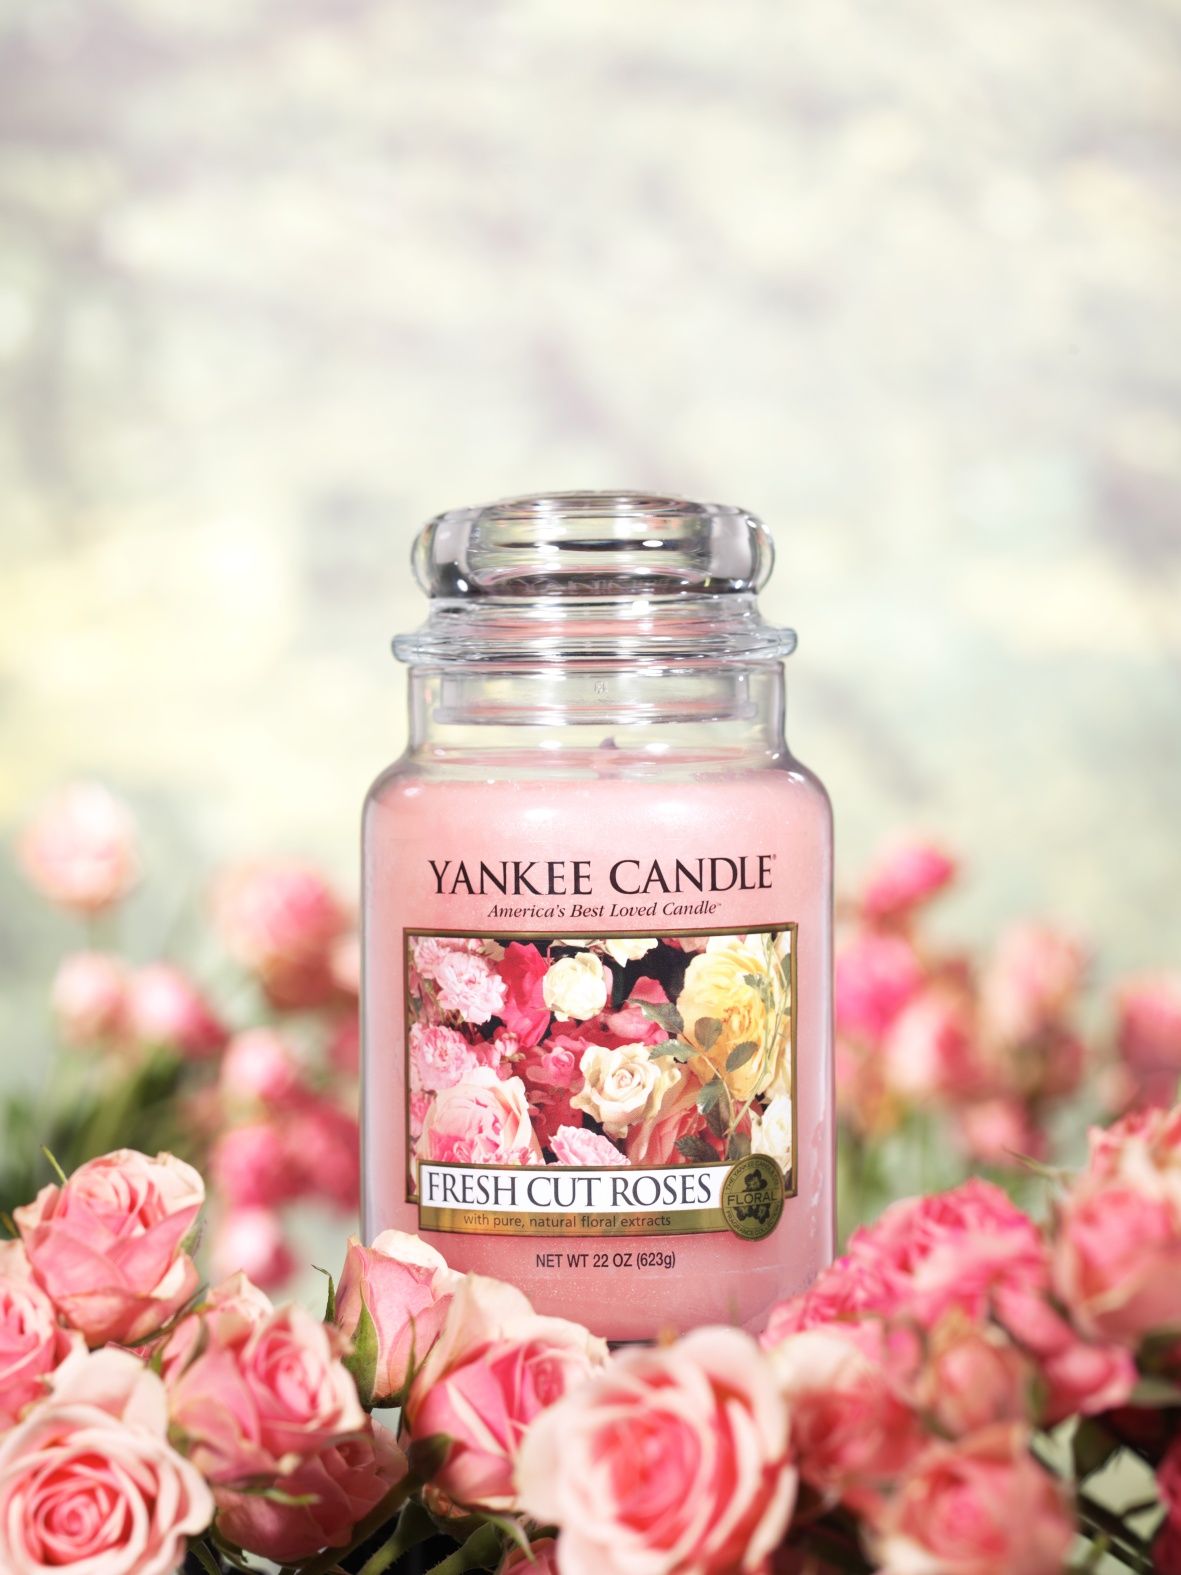 This Yankee Candle Deal for 60% Off Large Candles Is Insanely Good